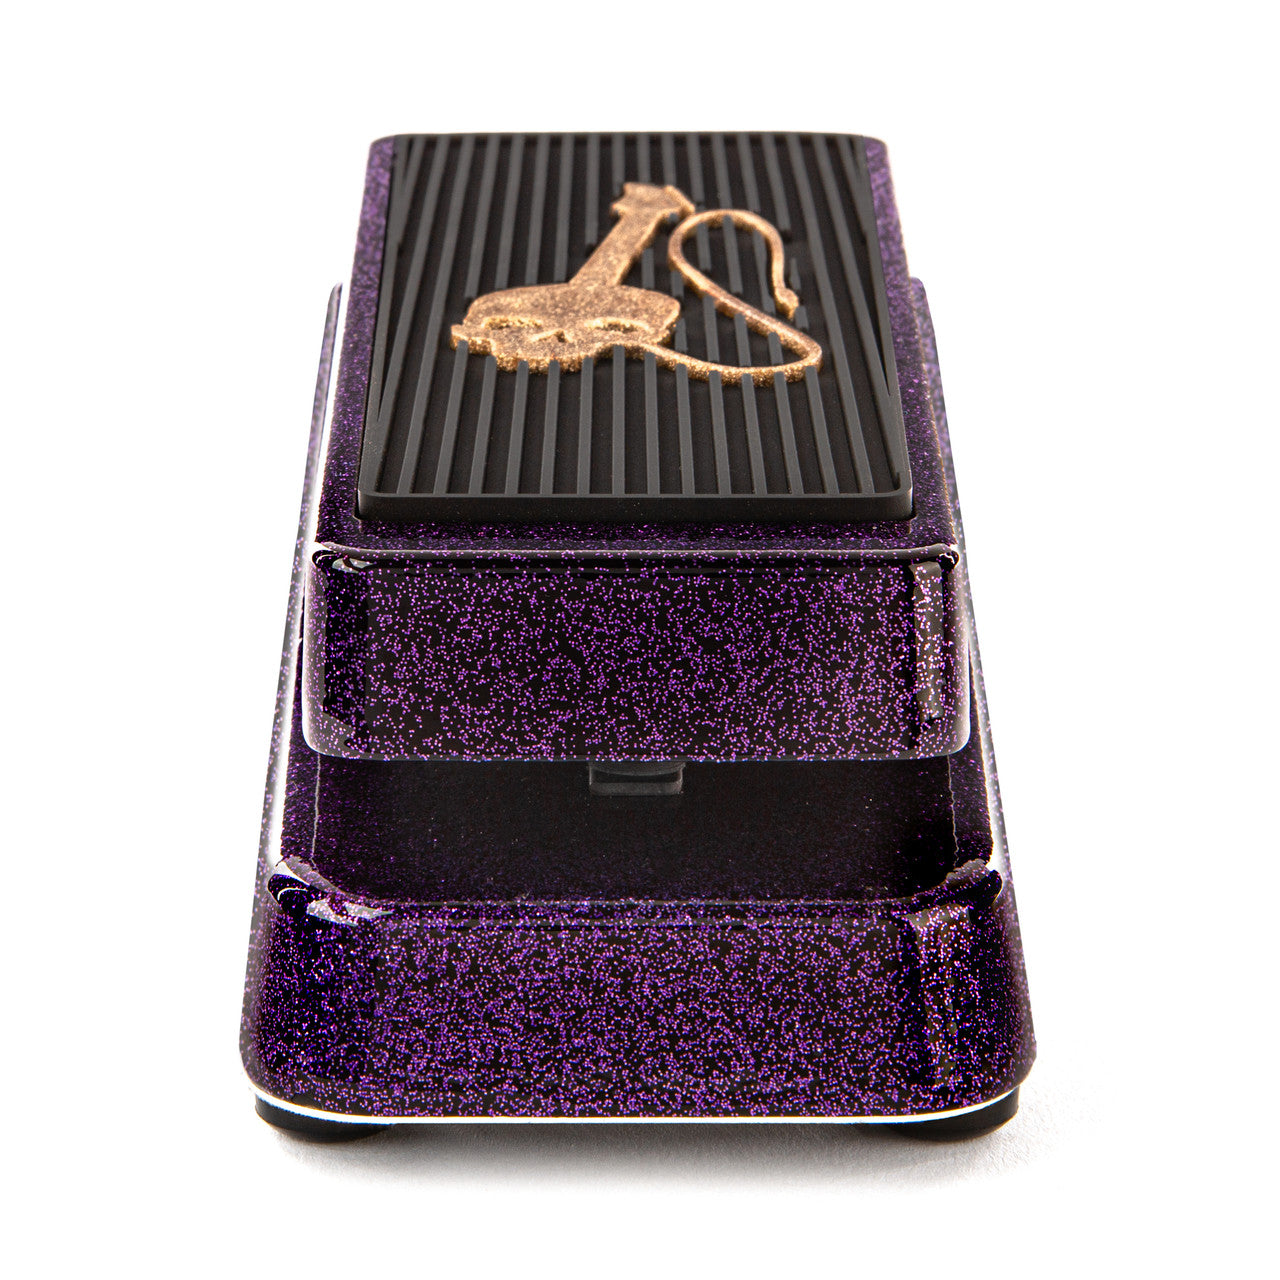 Kirk Hammett Cry Baby Collection Wah